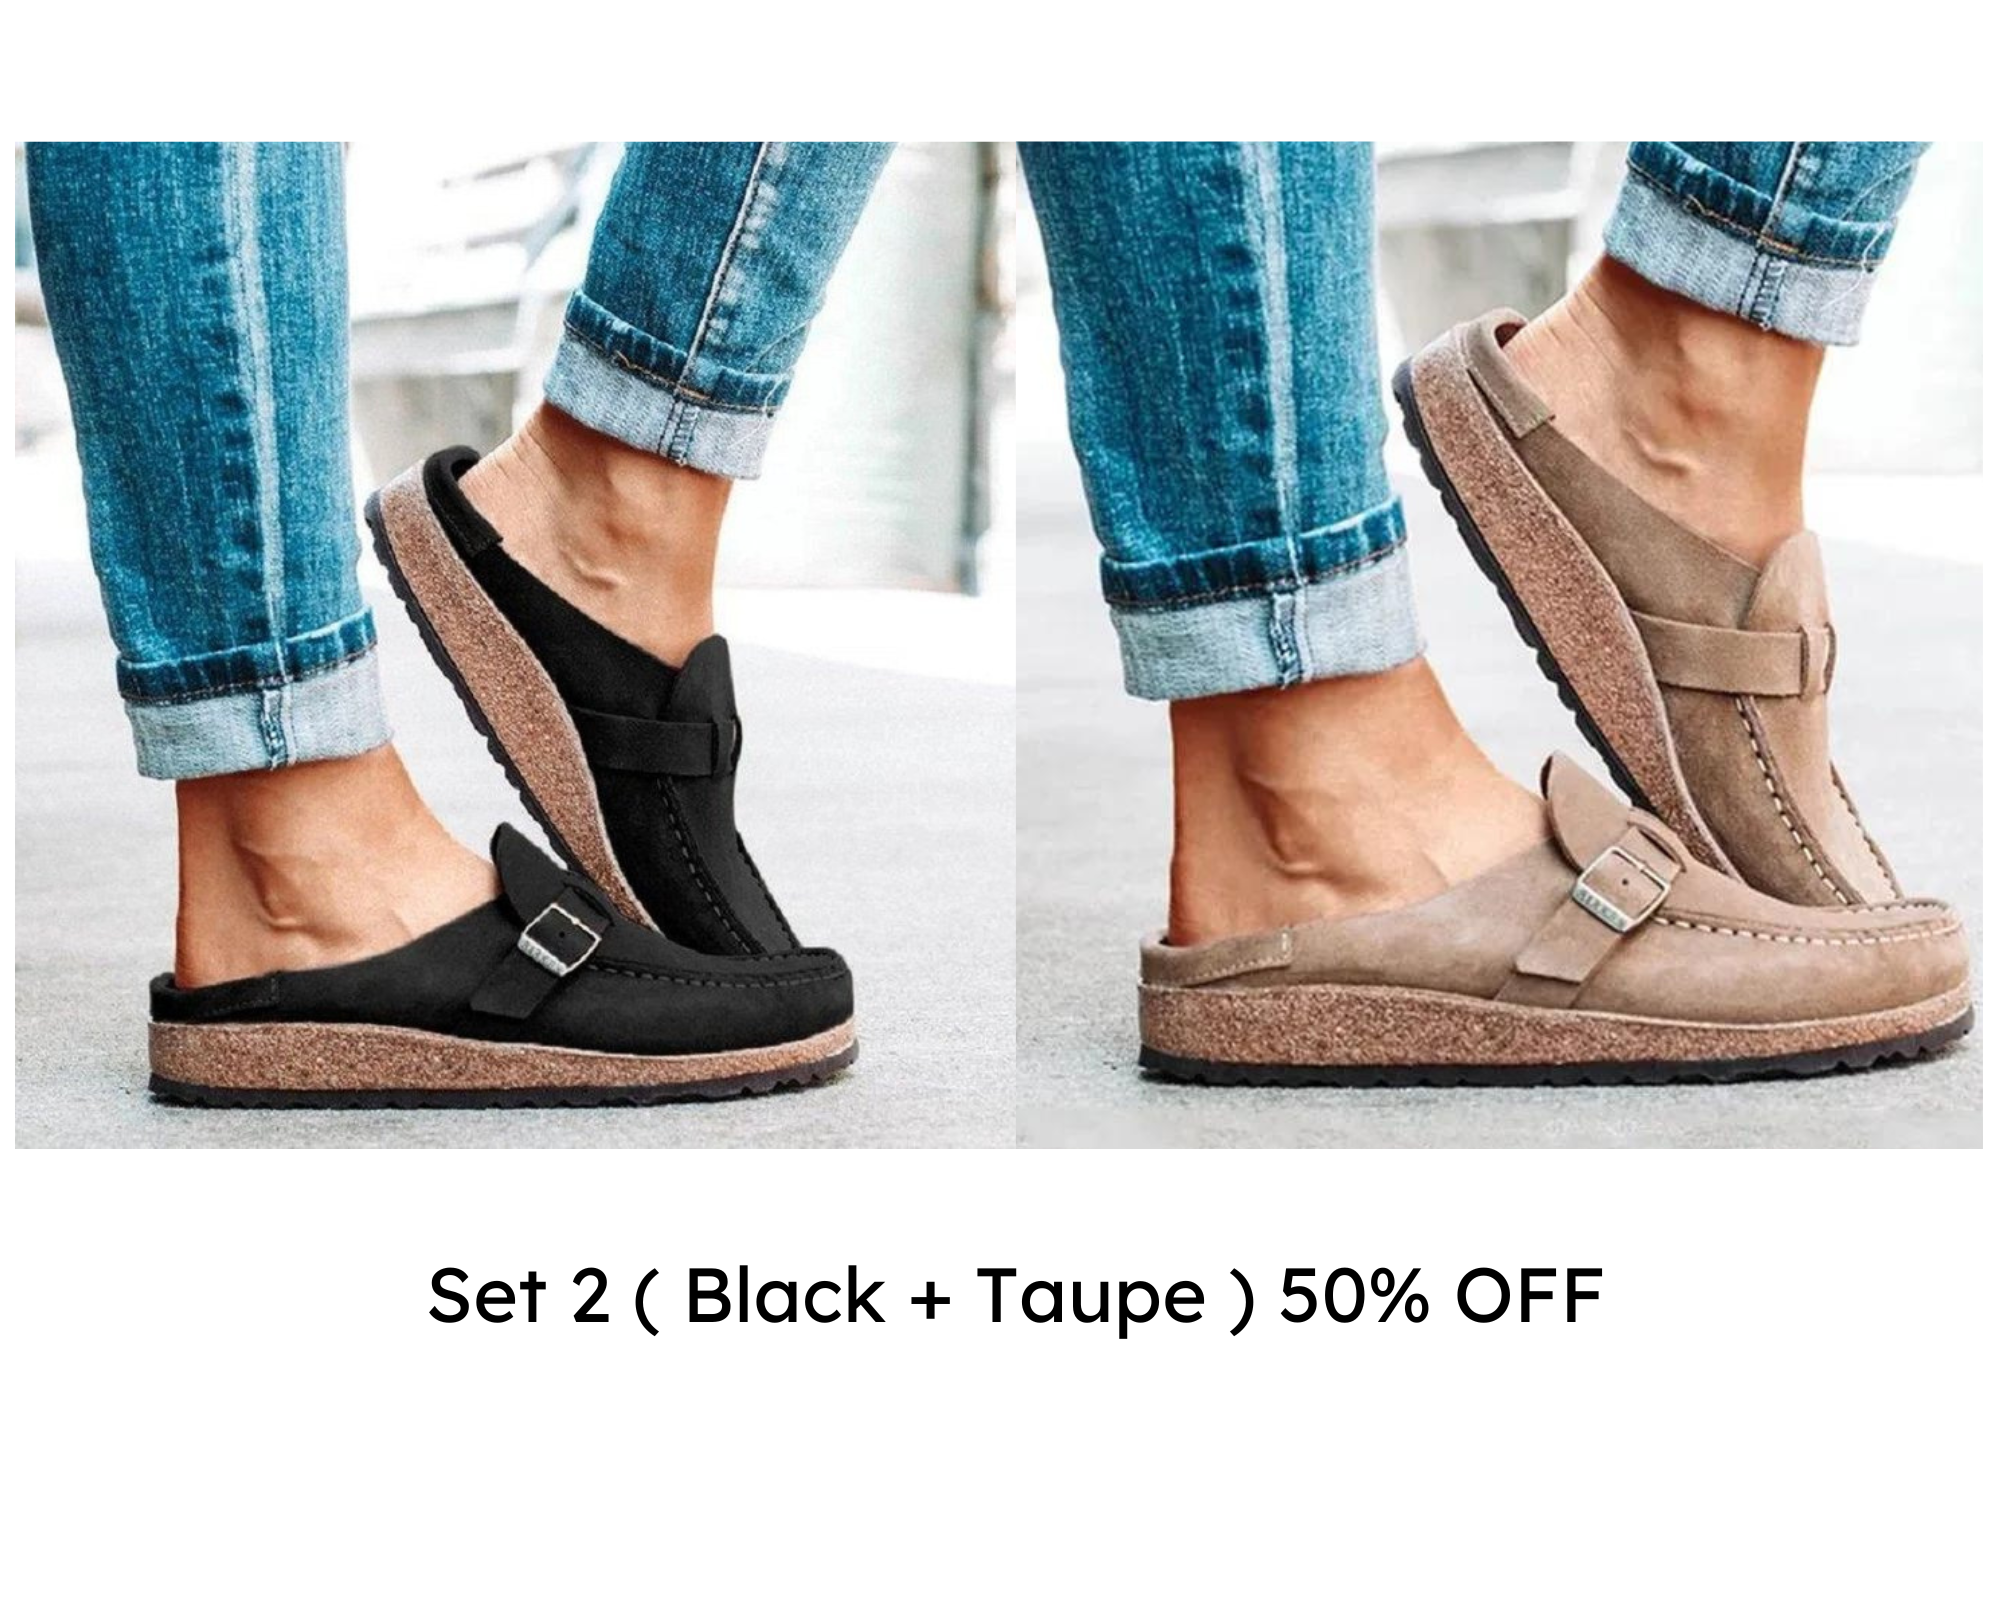 🔥CLEARANCE SALE🔥- WOMEN SOFT SOLE CASUAL COMFY LEATHER SLIP ON SANDALS